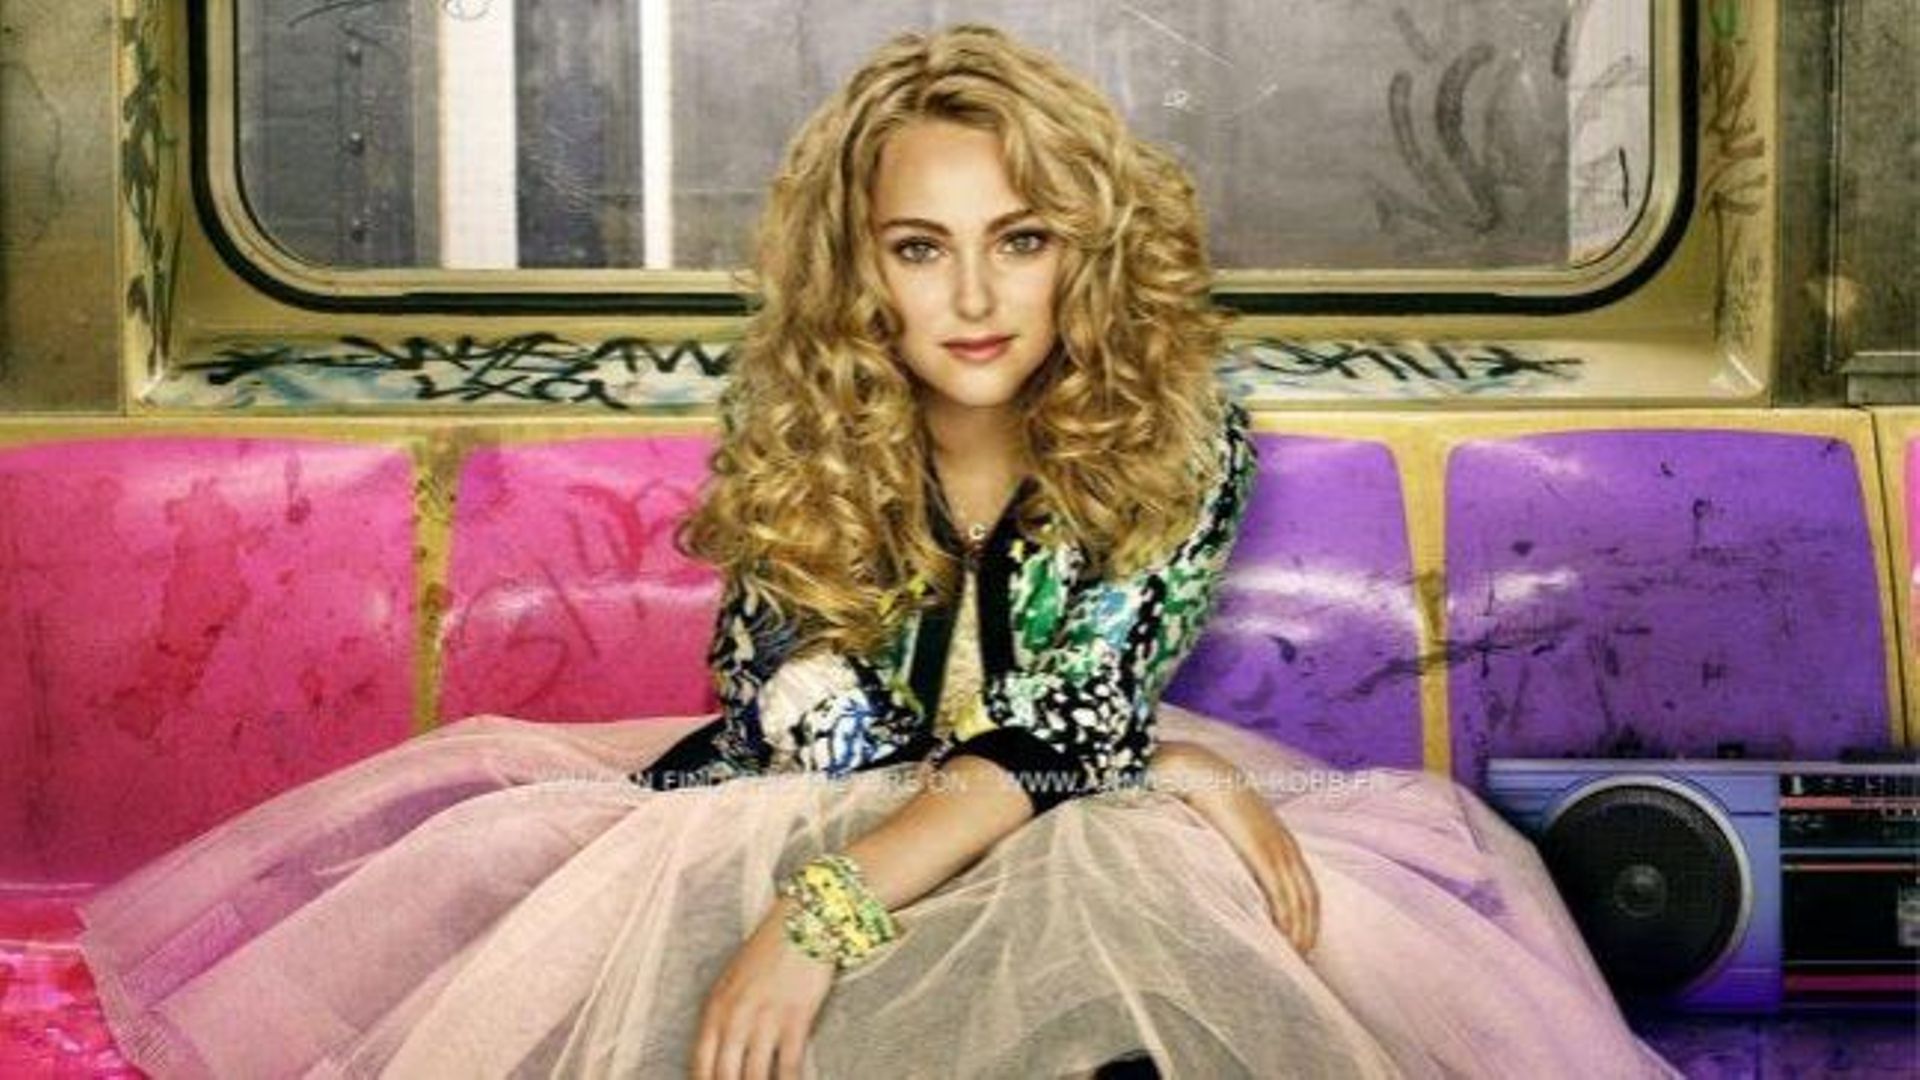 "The Carrie Diaries"